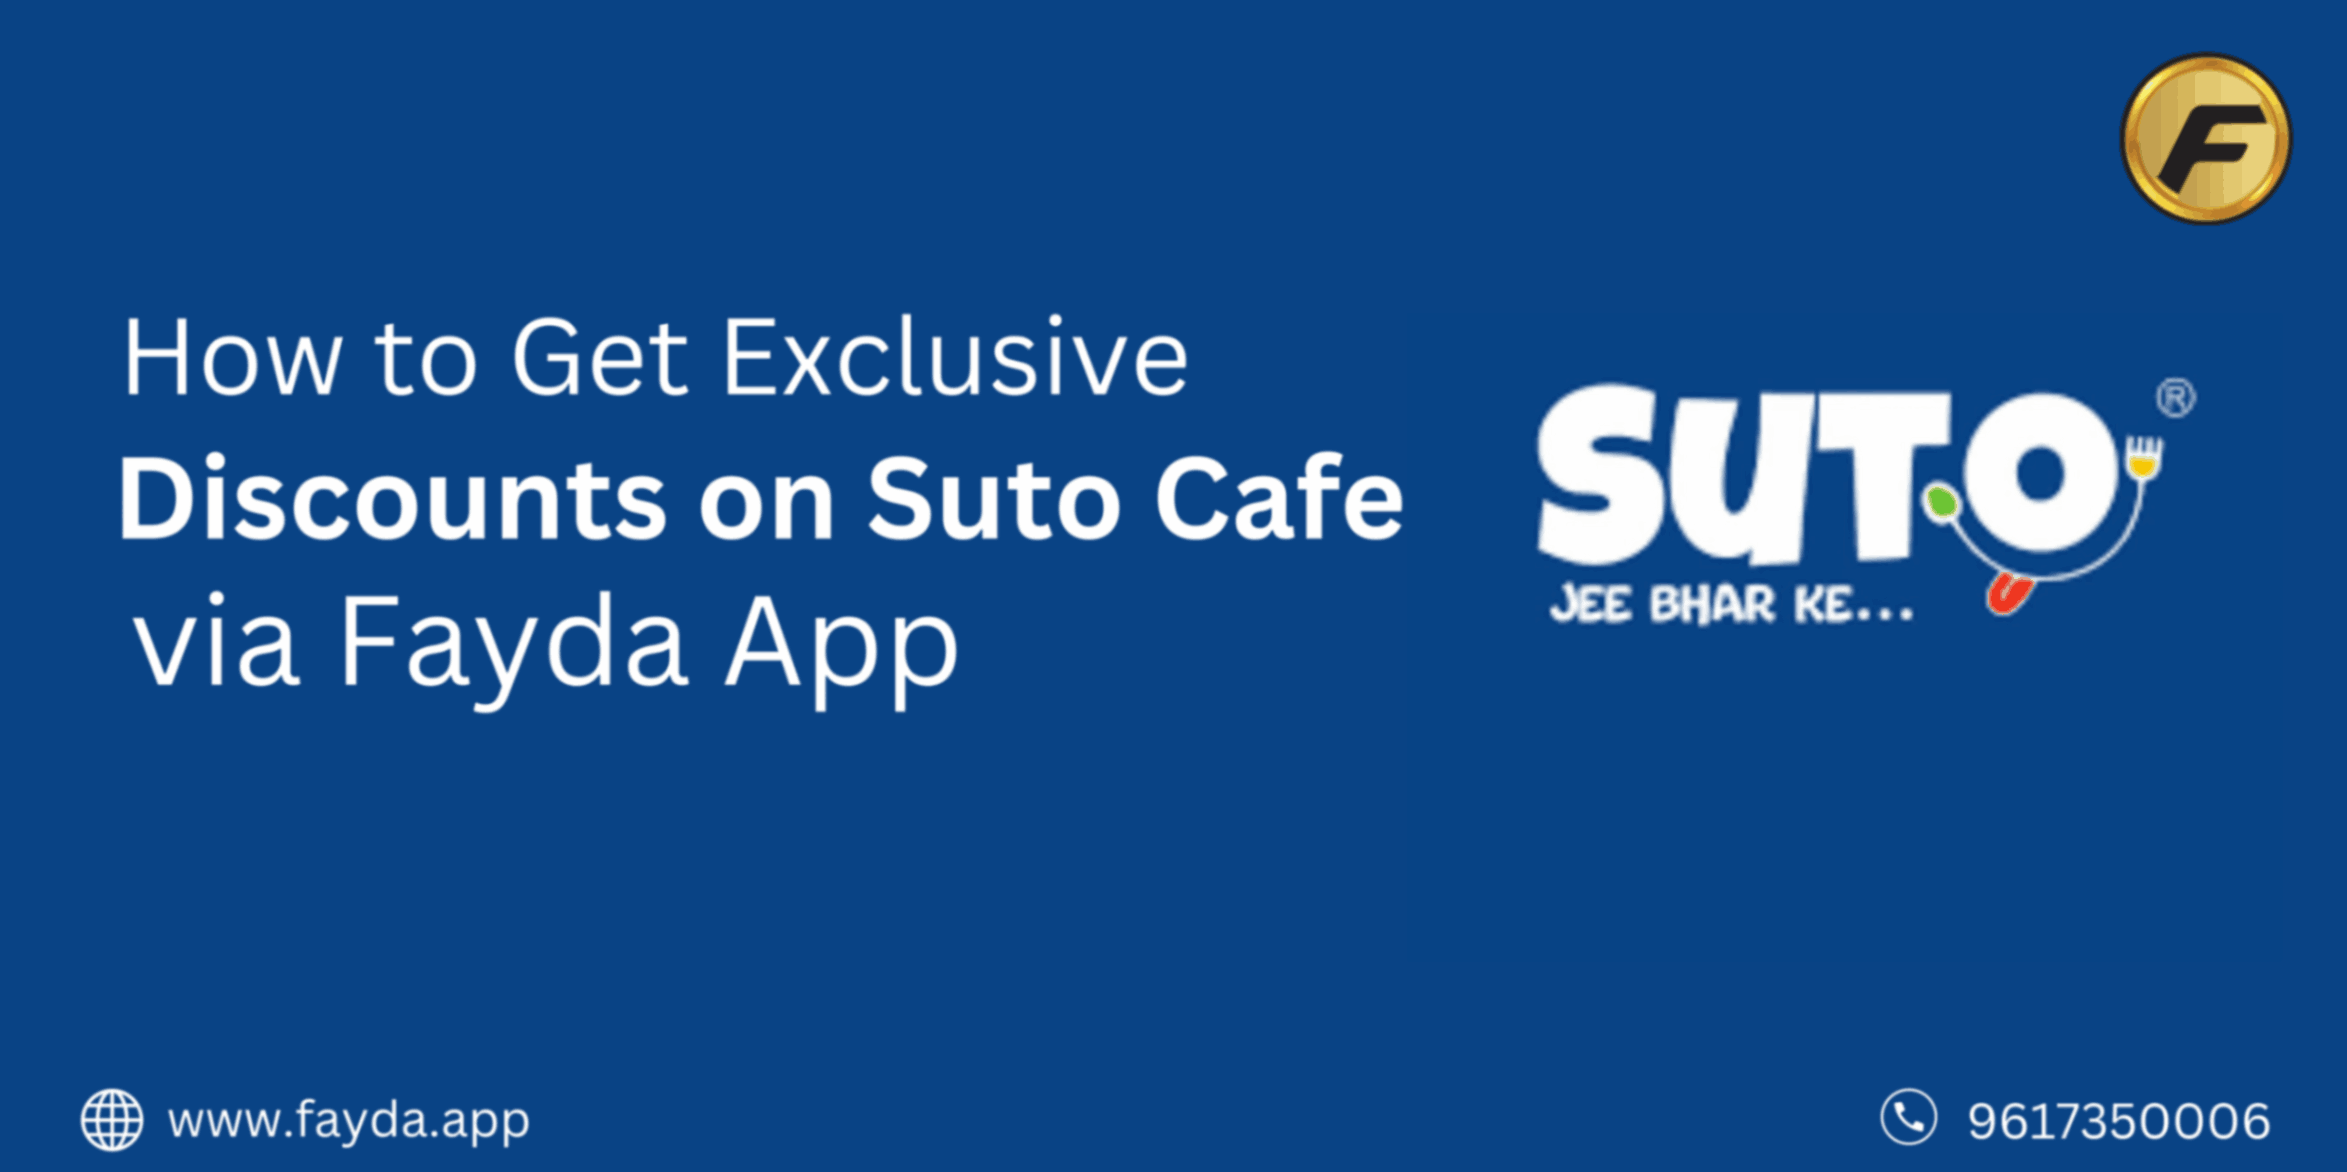 How to Get Exclusive Discounts on Suto Cafe via Fayda App